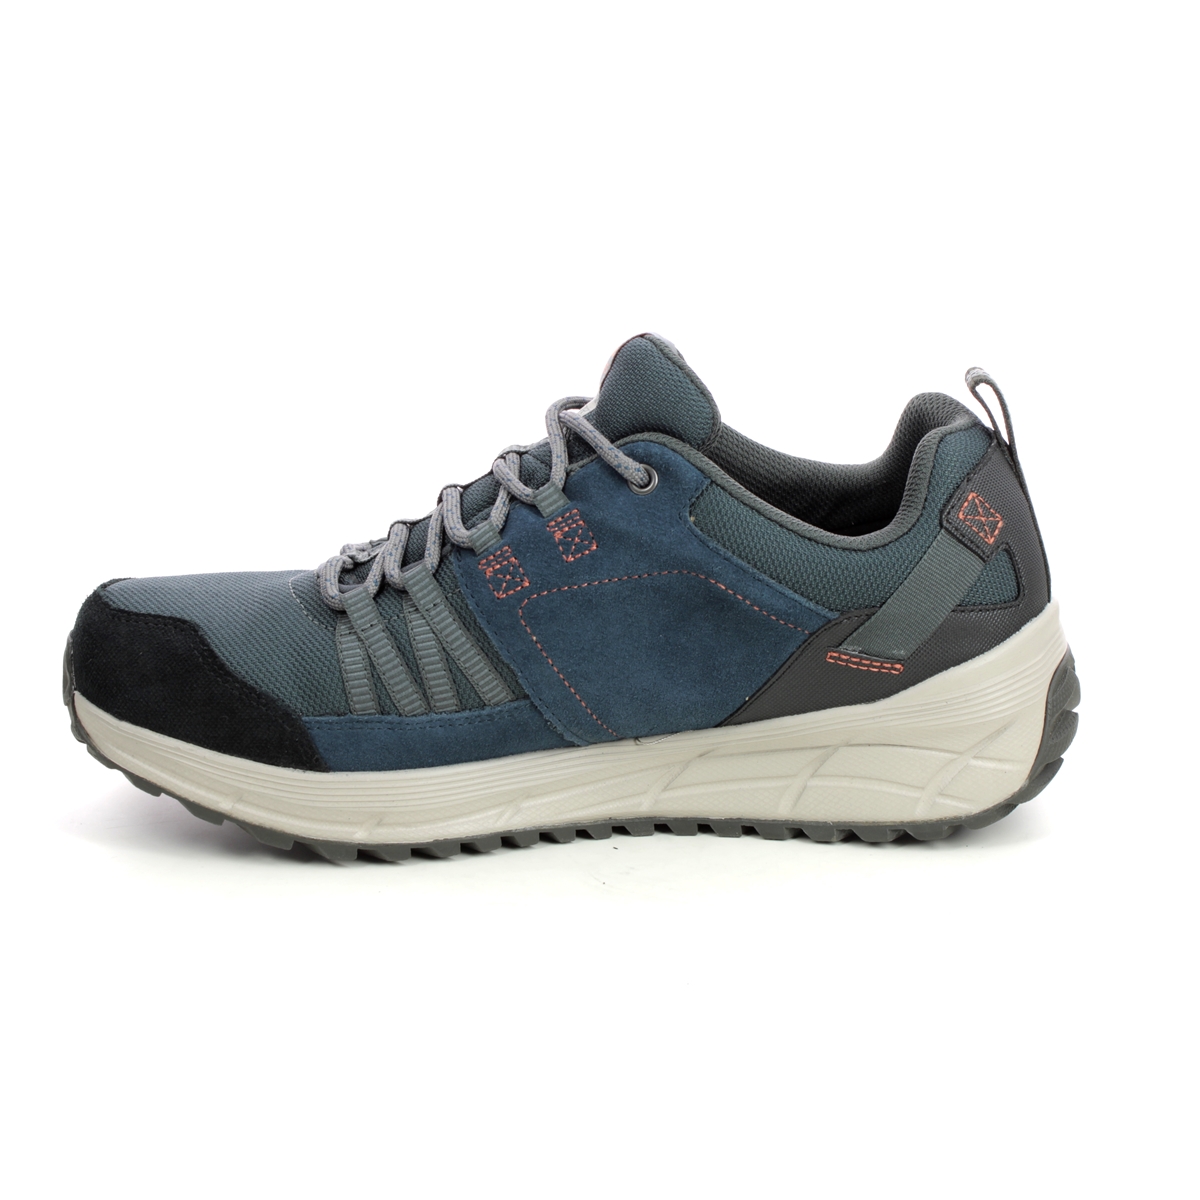 Skechers Equalizer Tex 237179 NVY Navy Walking Shoes